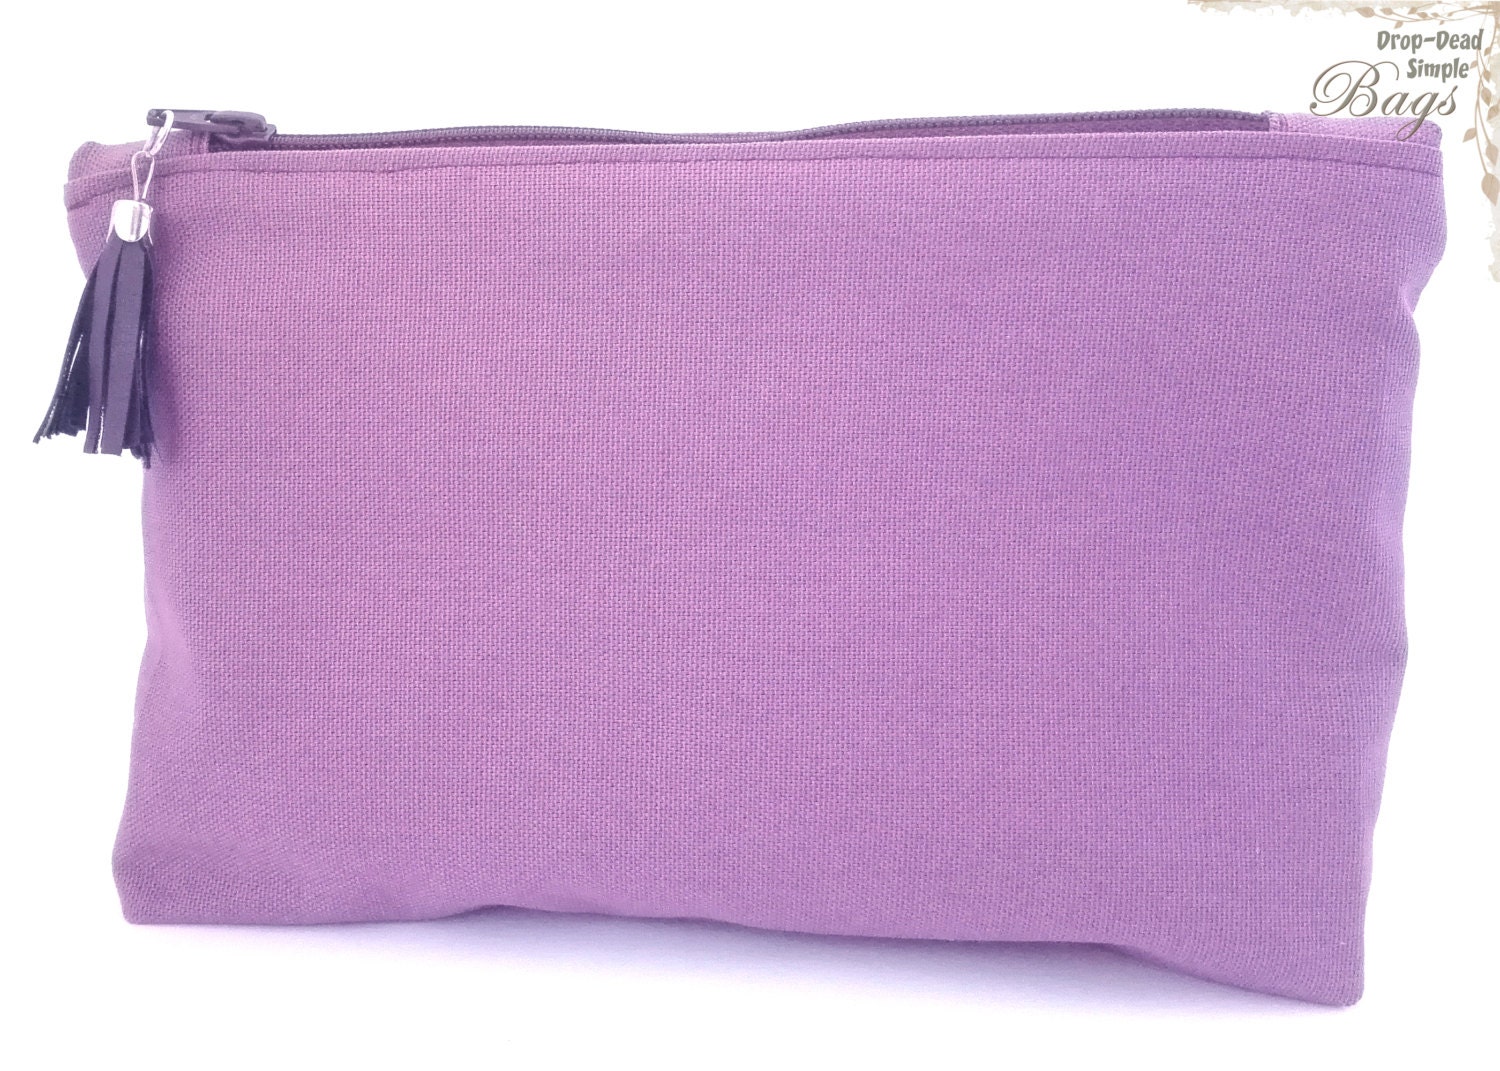 Purple Make Up Bags Makeup Bags Toiletry by DropDeadSimpleBags